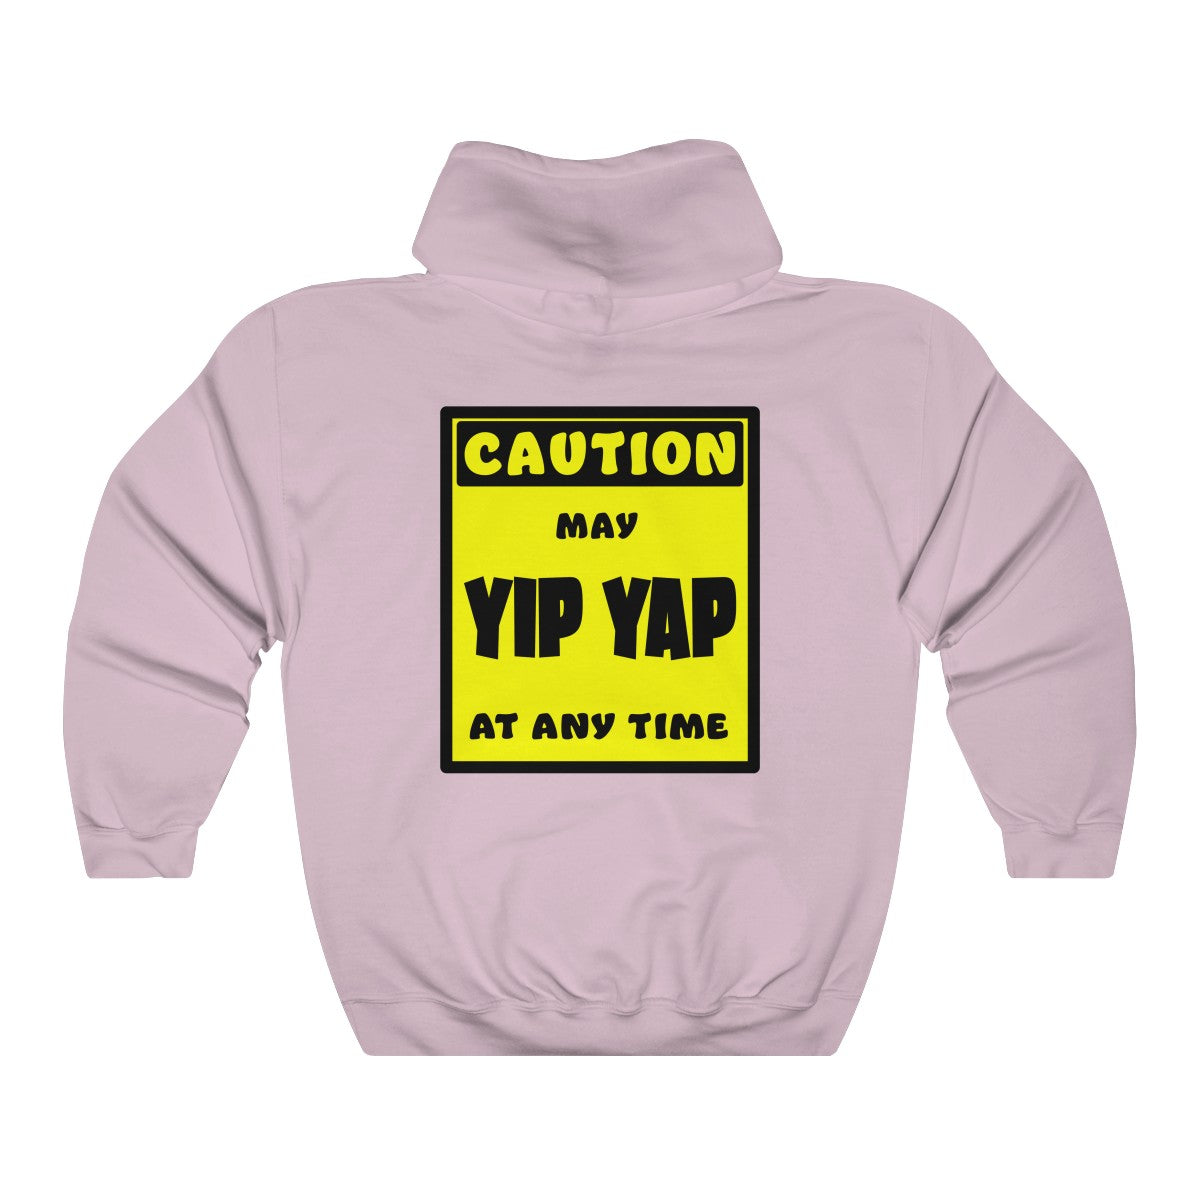 CAUTION! May Yip Yap at any time! - Hoodie Hoodie AFLT-Whootorca Light Pink S 